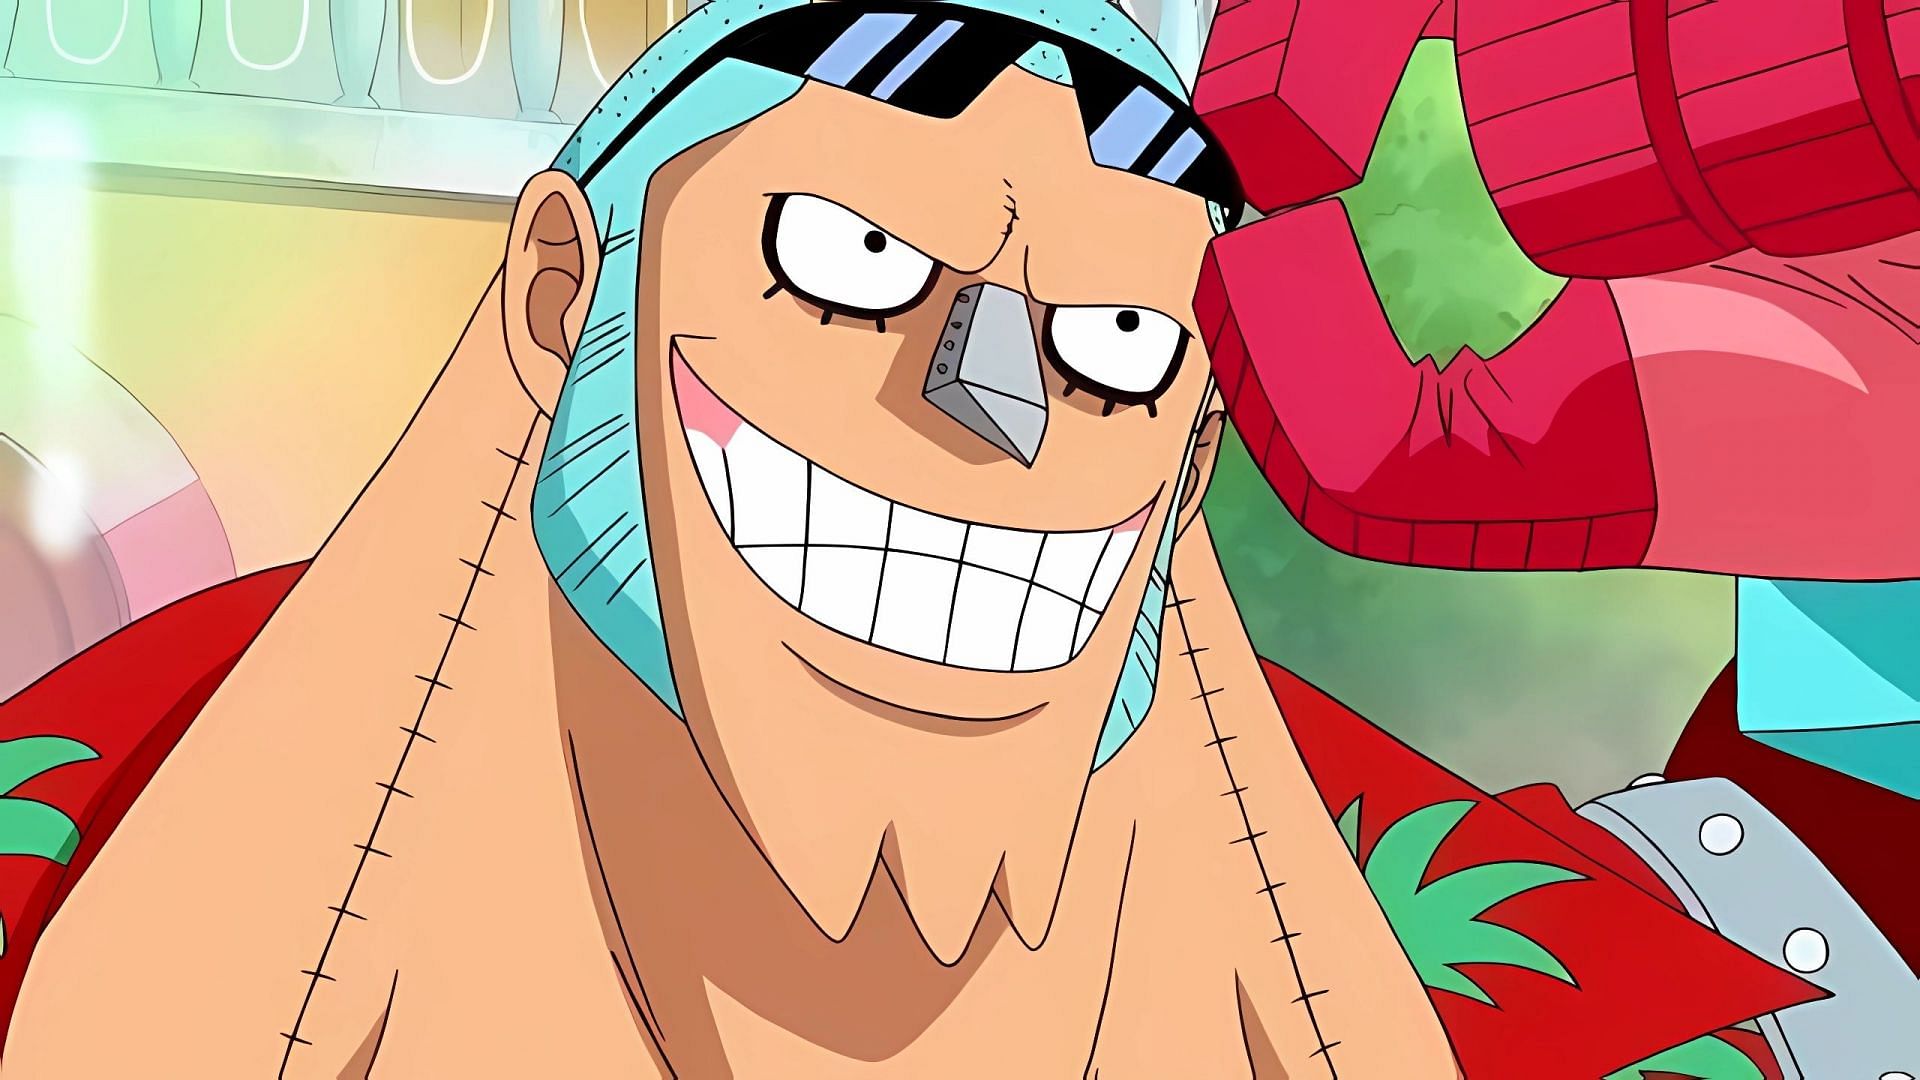 Franky as seen in the anime (Image via Toei Animation)